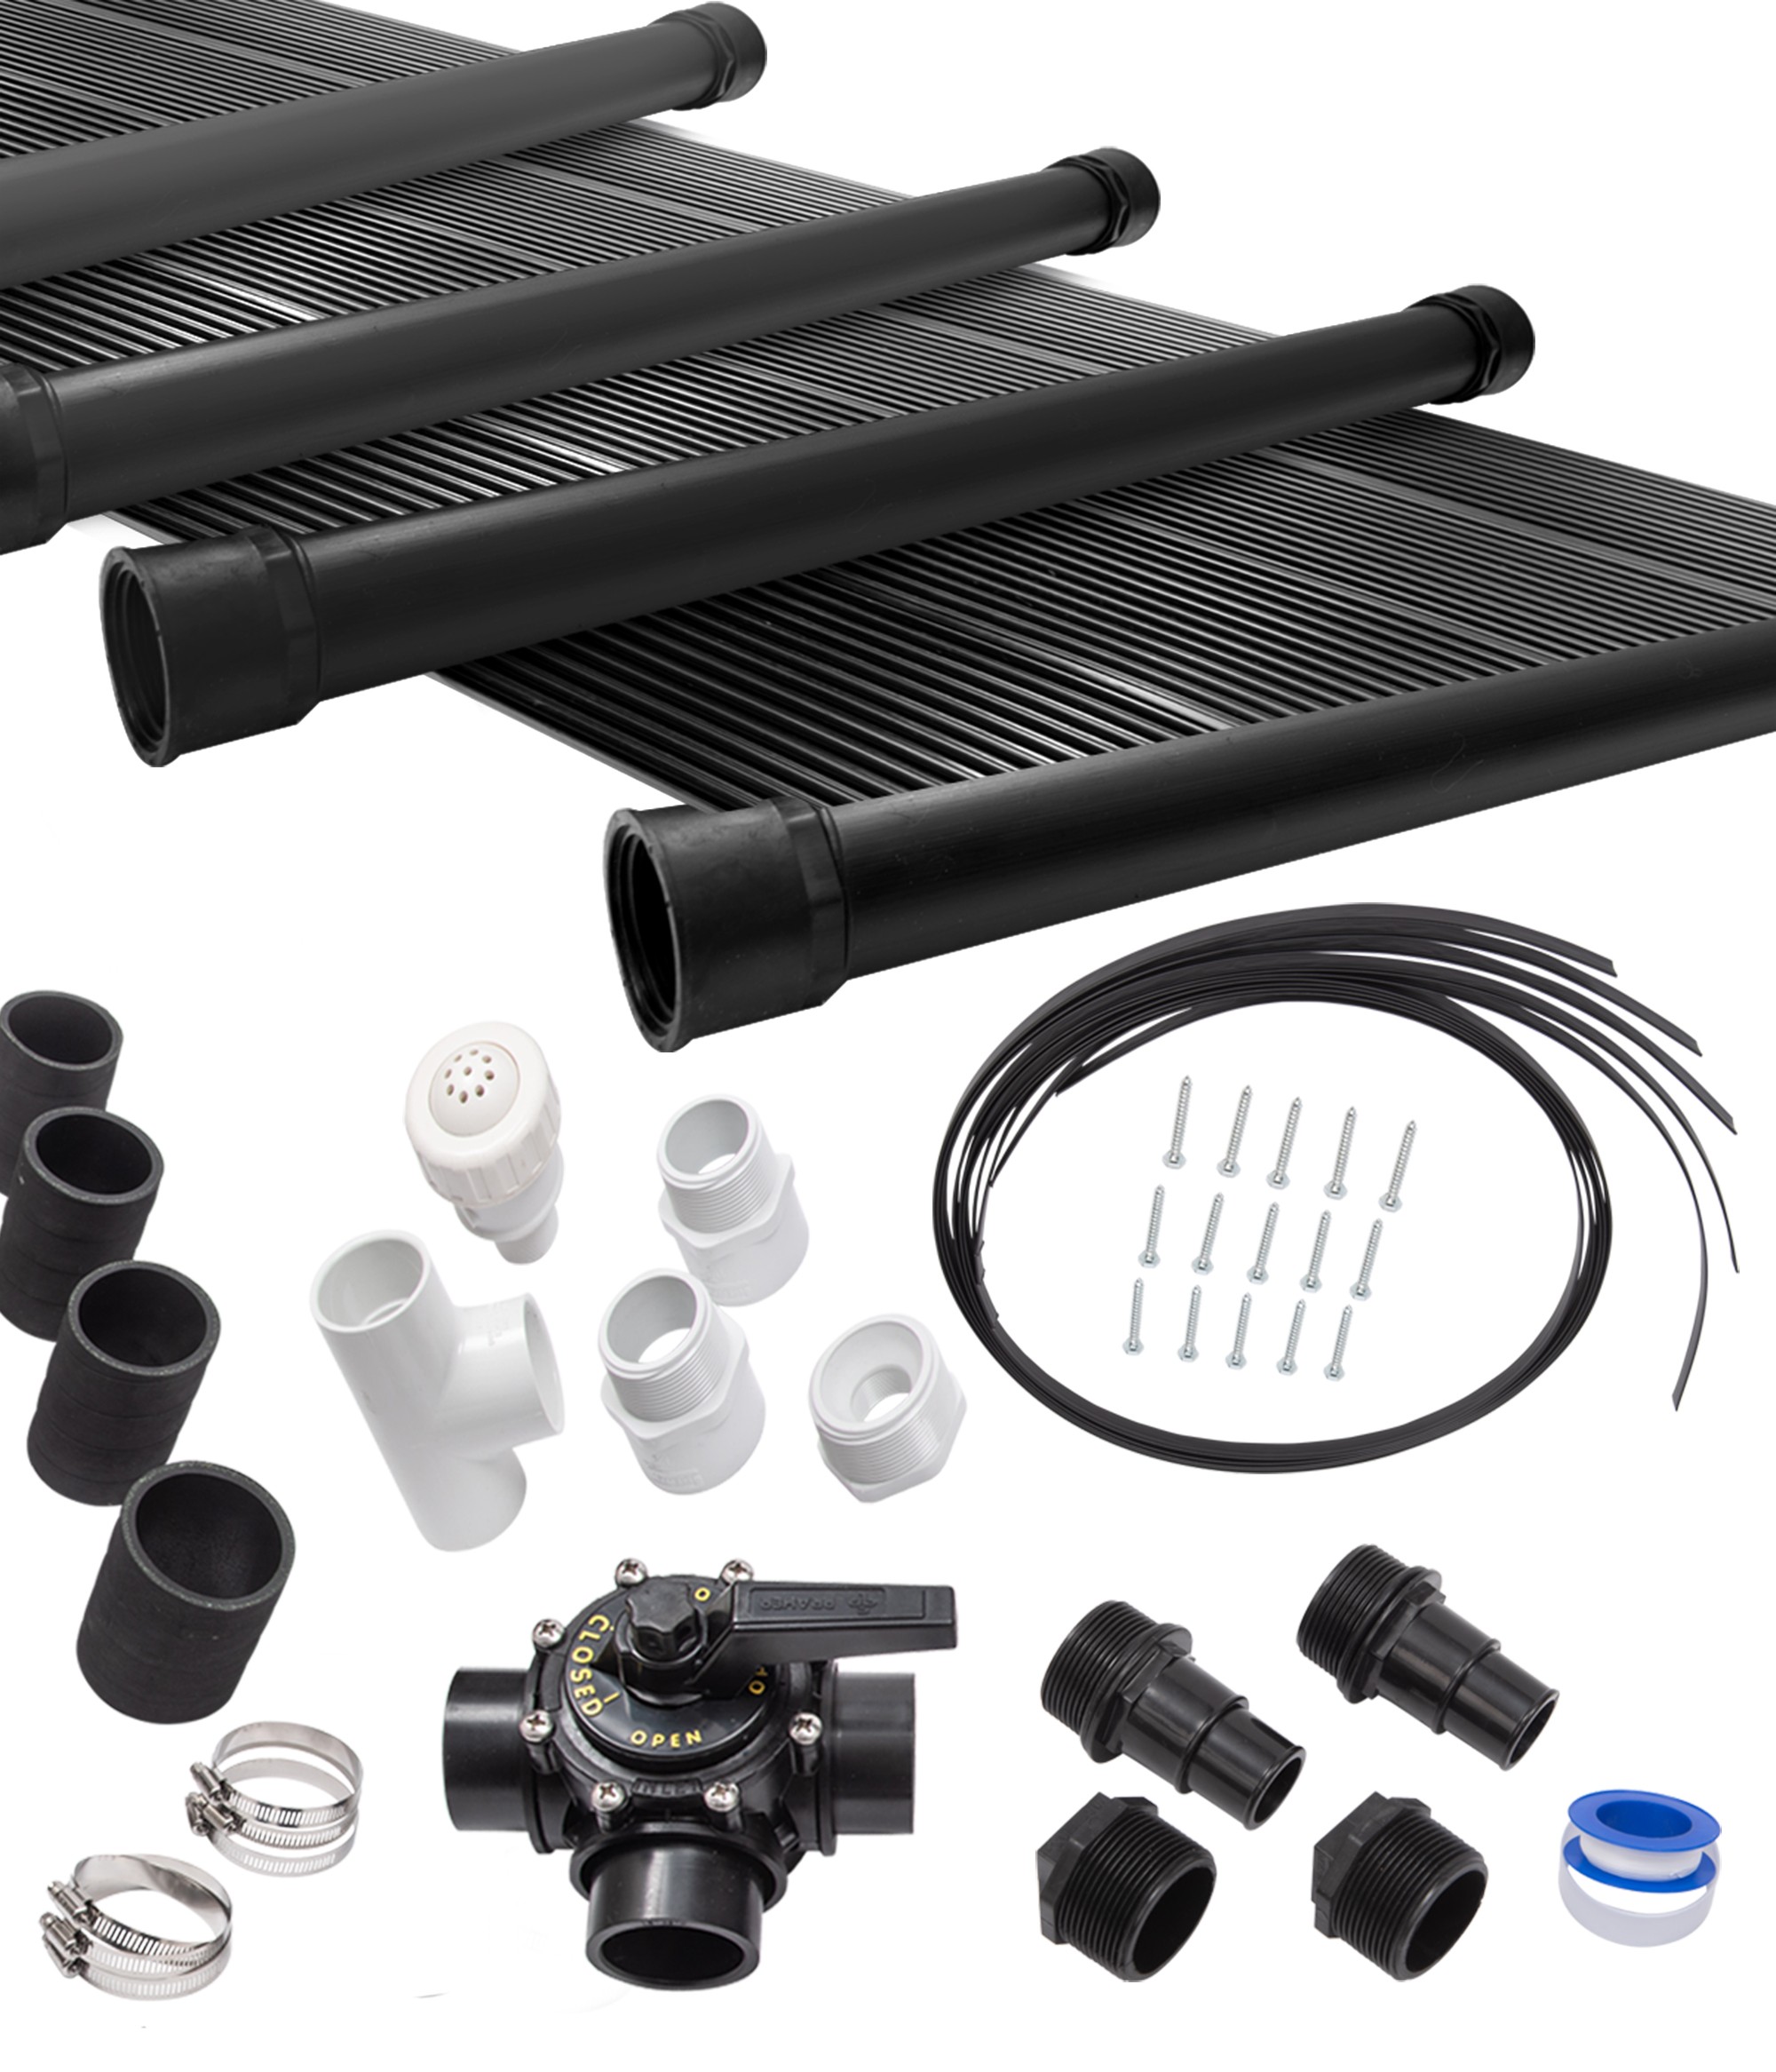 8-2X10' SunQuest Solar Swimming Pool Heater Complete System with Roof Kits